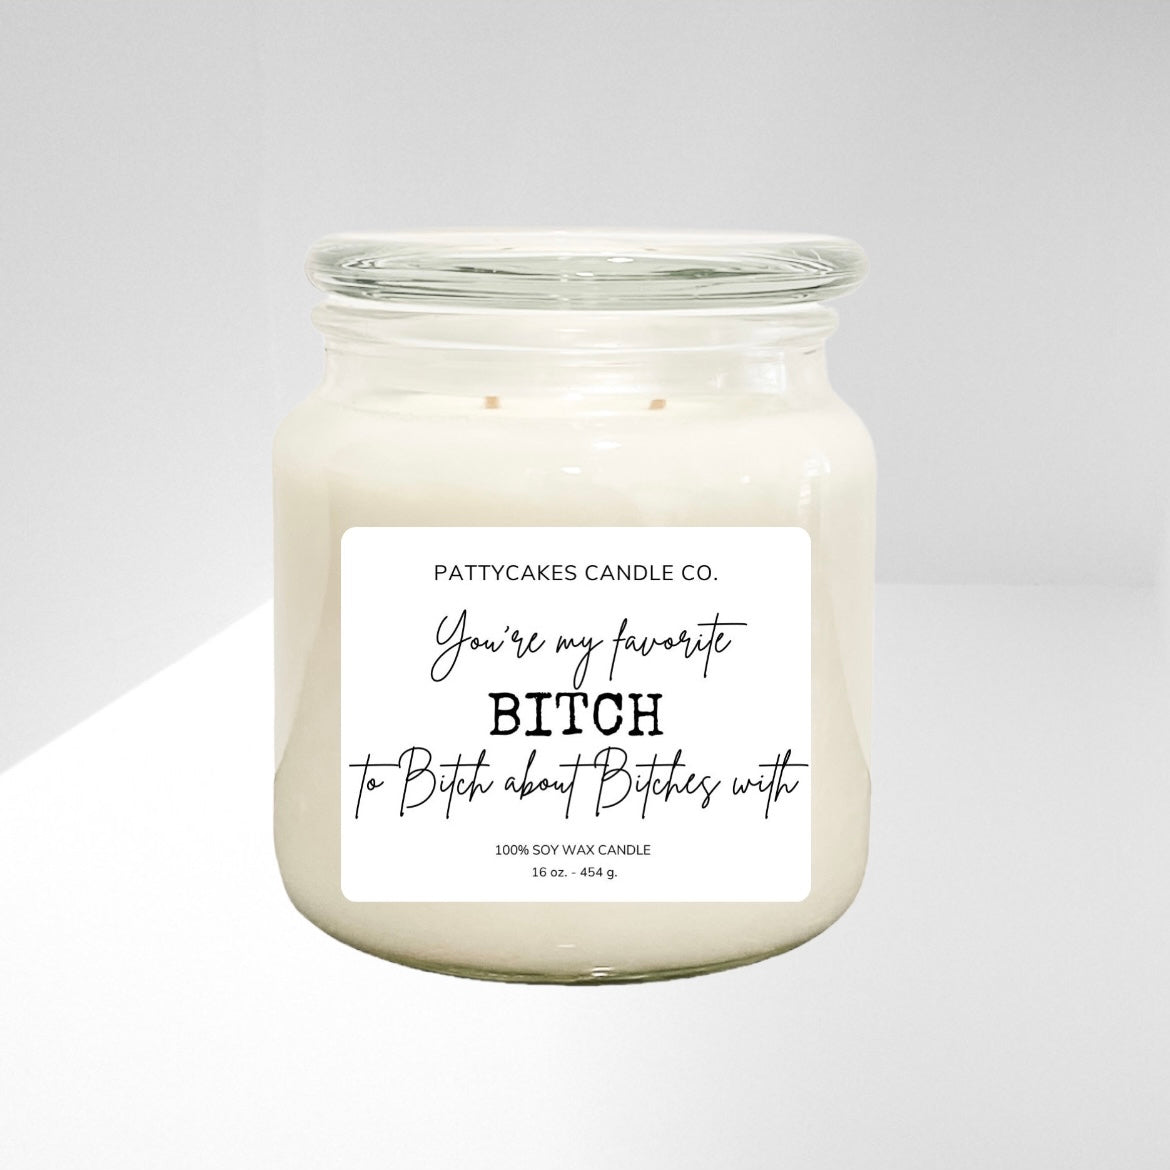 FAVORITE BITCH CANDLE